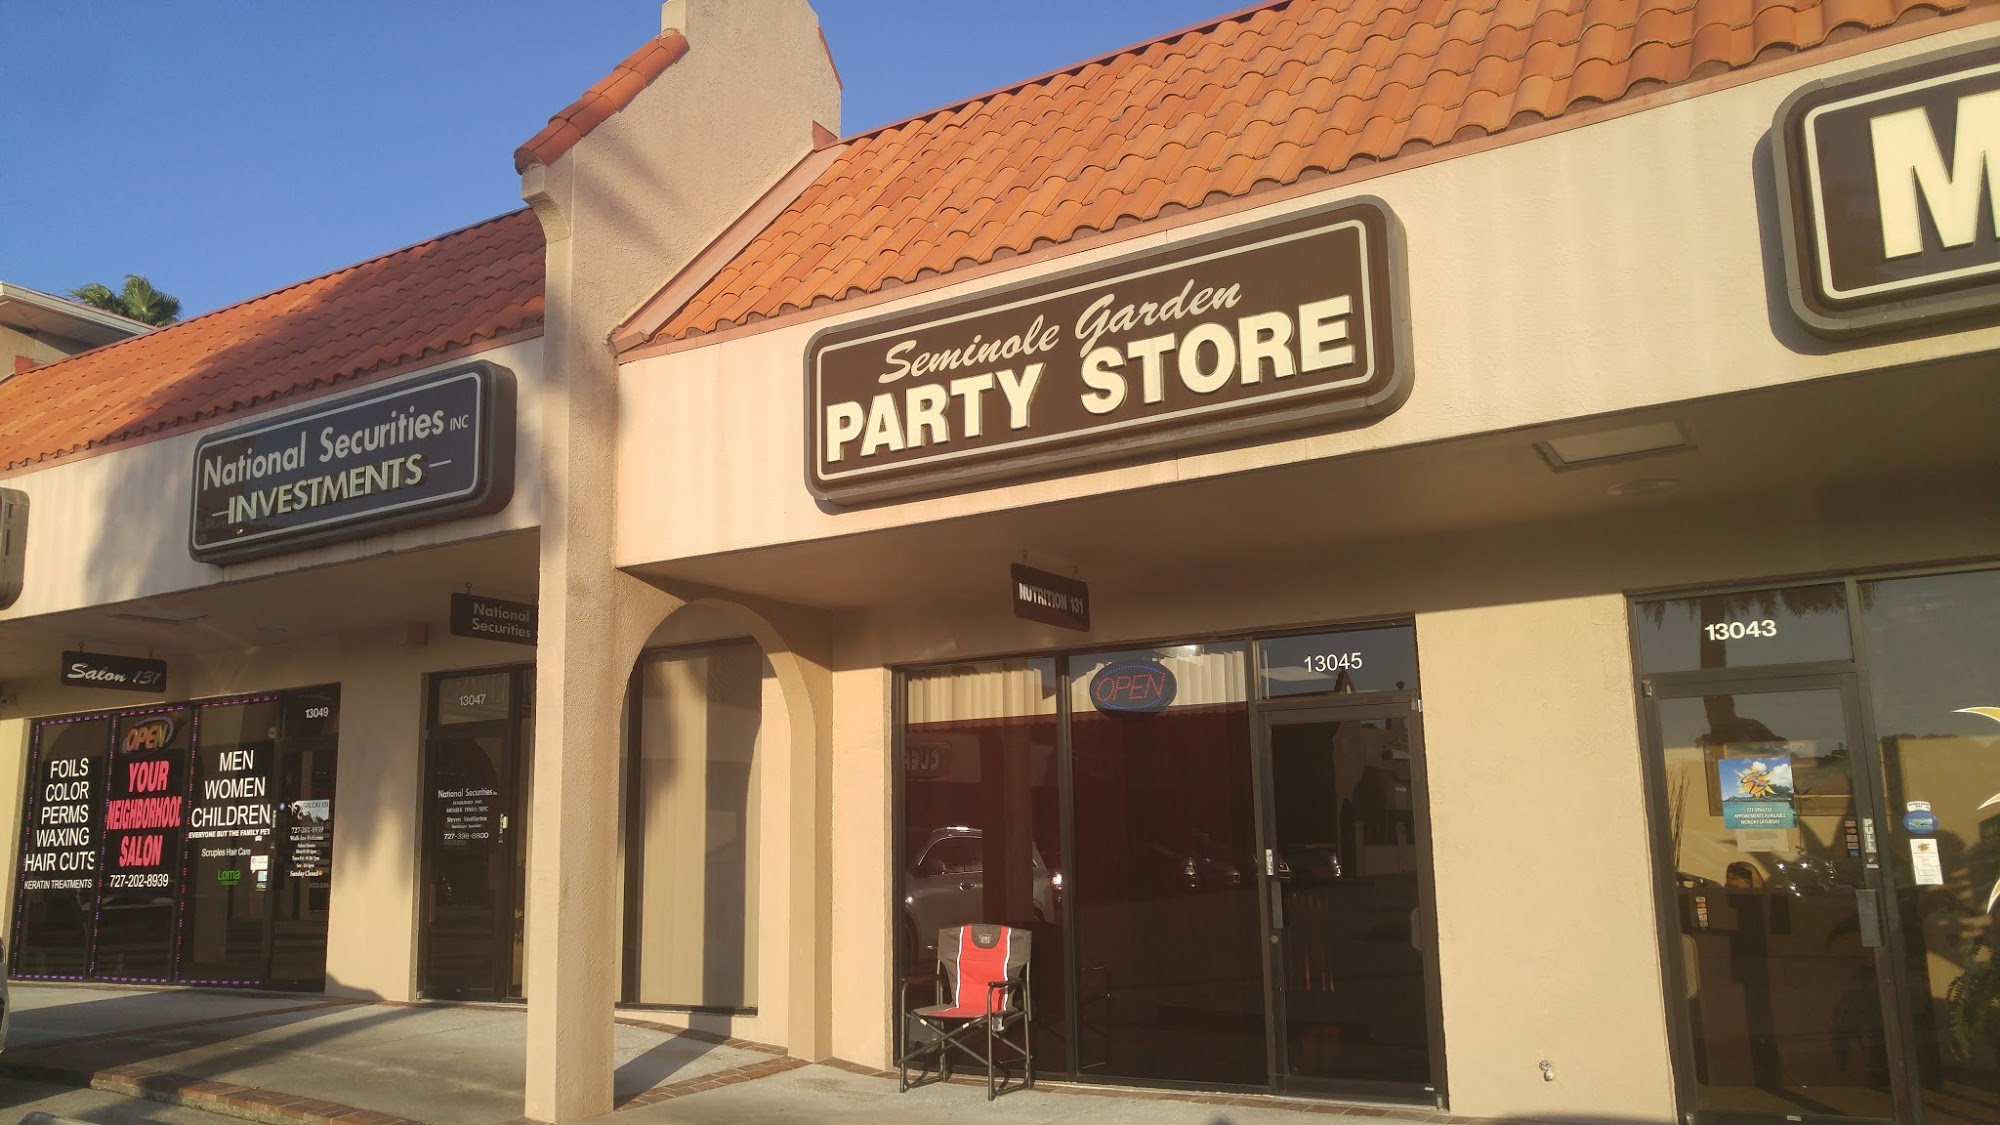 Seminole Garden Florist and Party Store